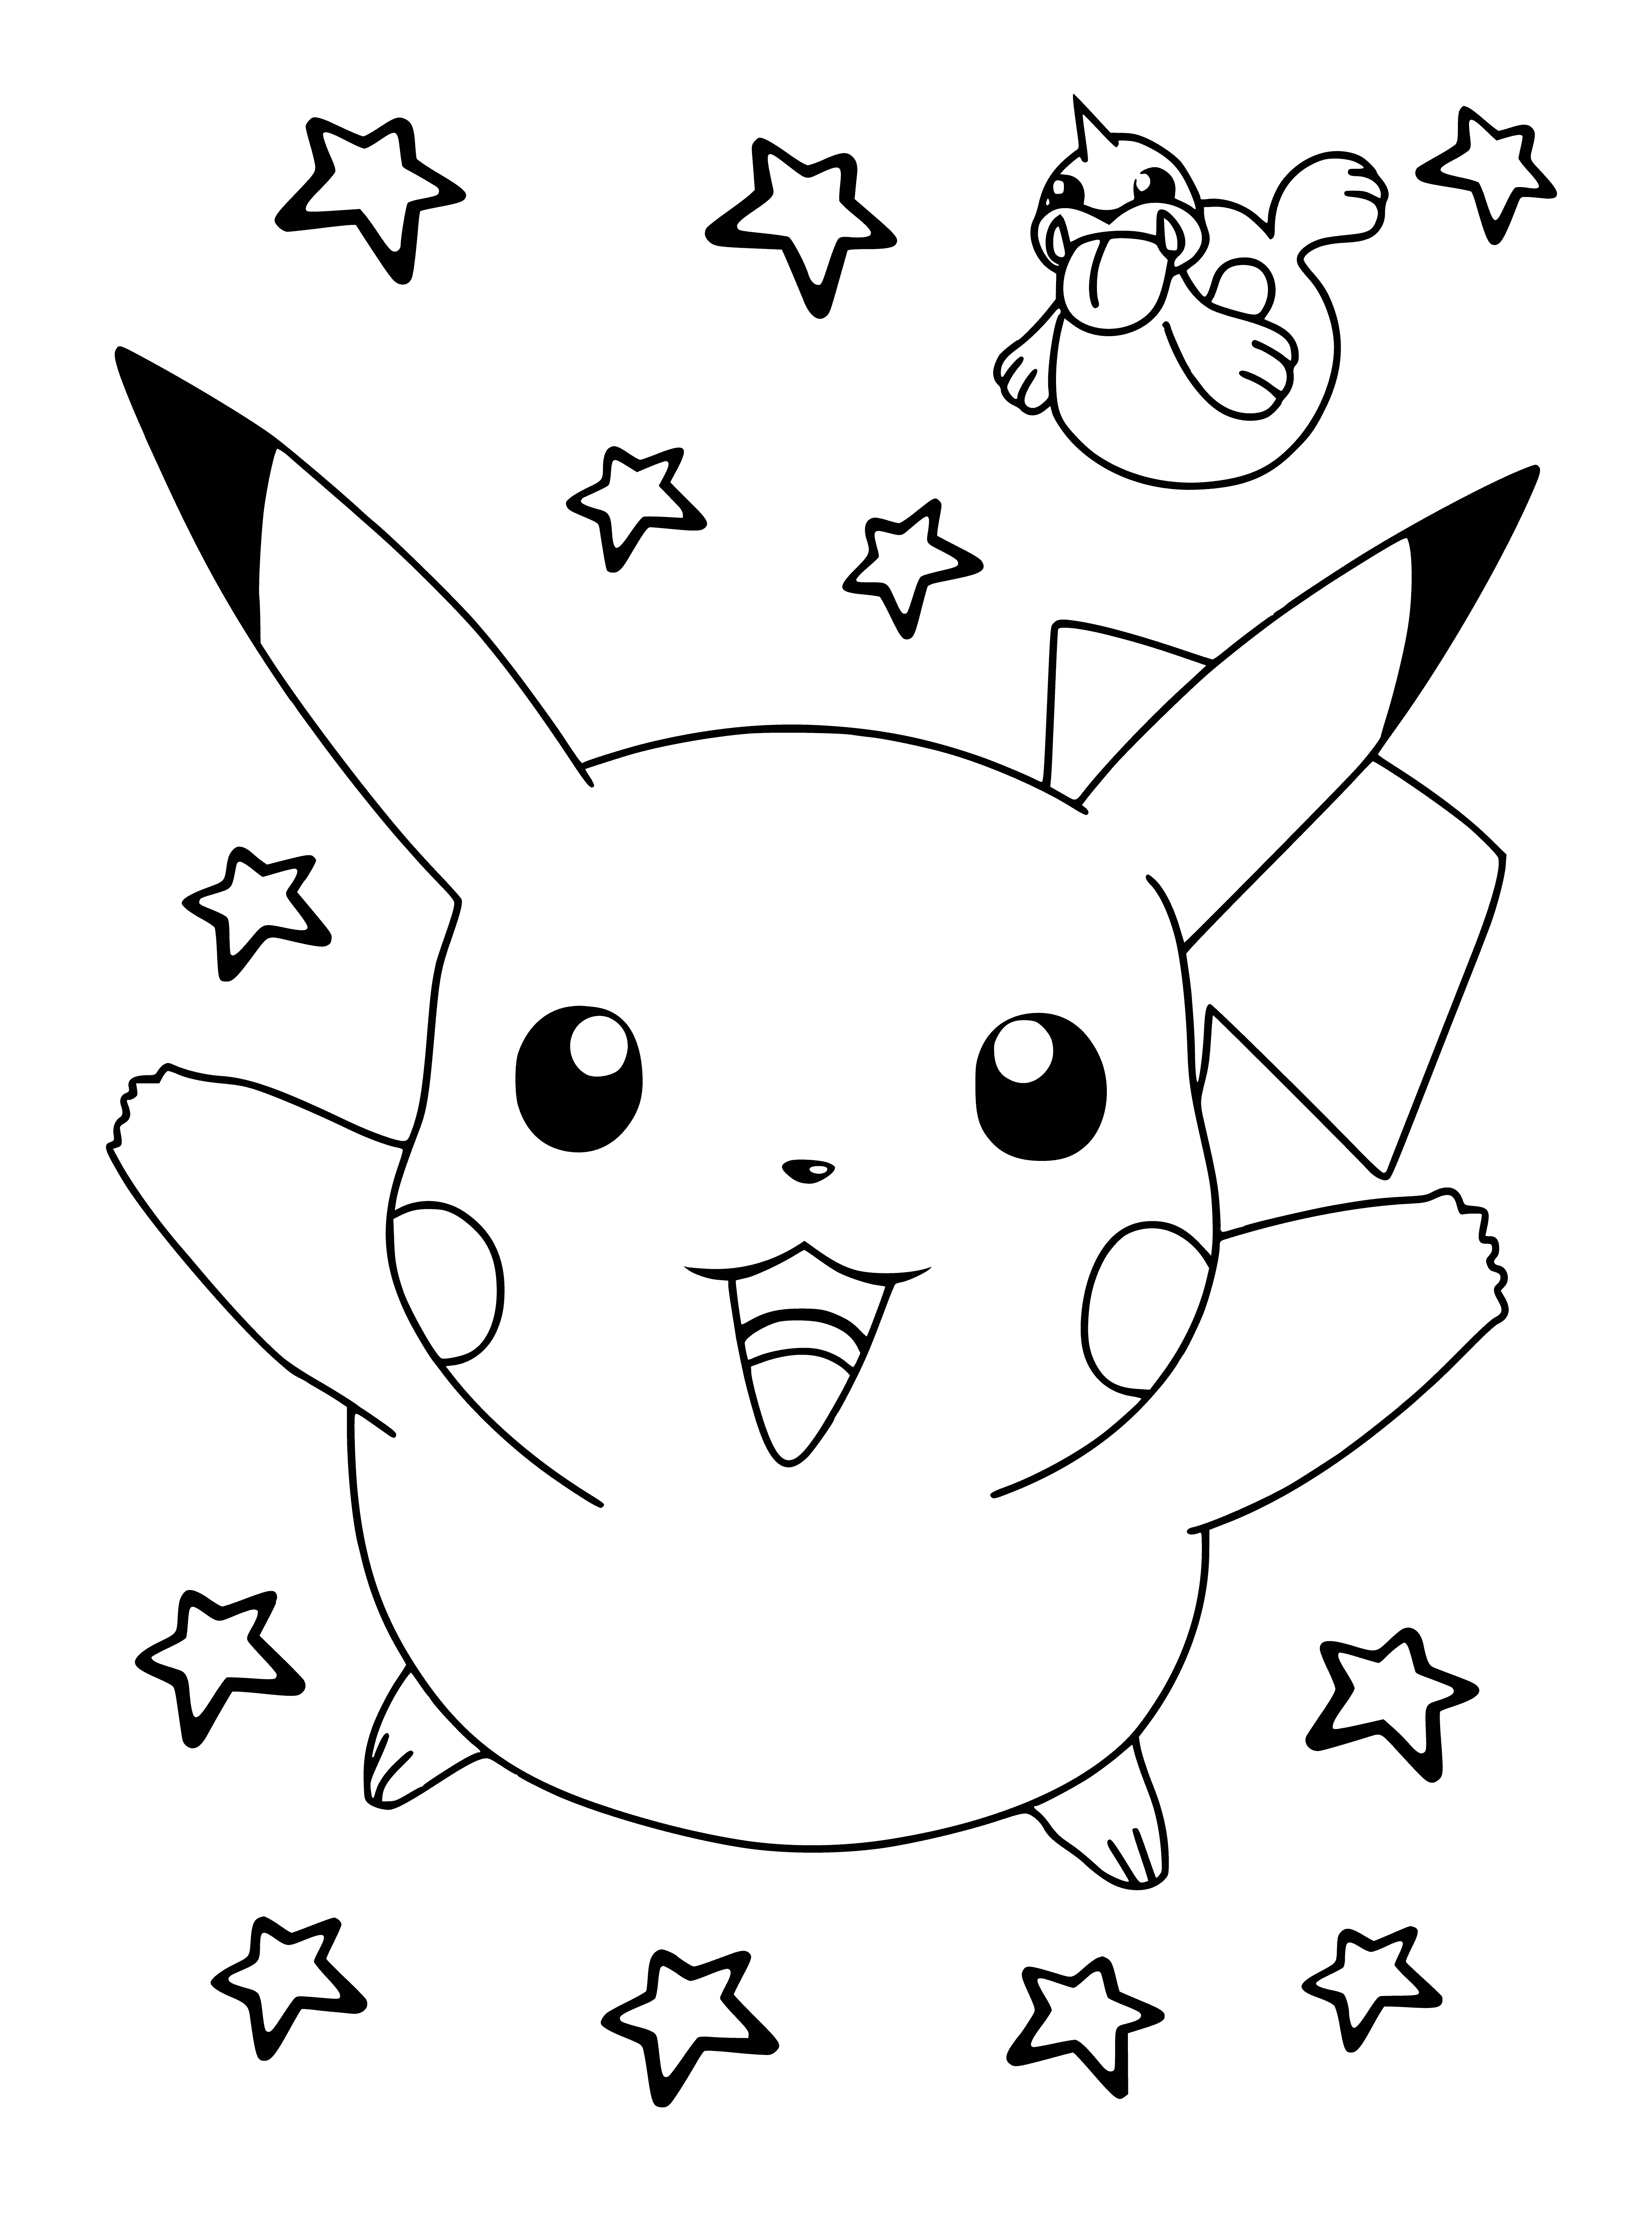 coloring page: Pikachu is a popular yellow Pokémon with black stripes & electric attacks. Its tail is longer than other rodents.